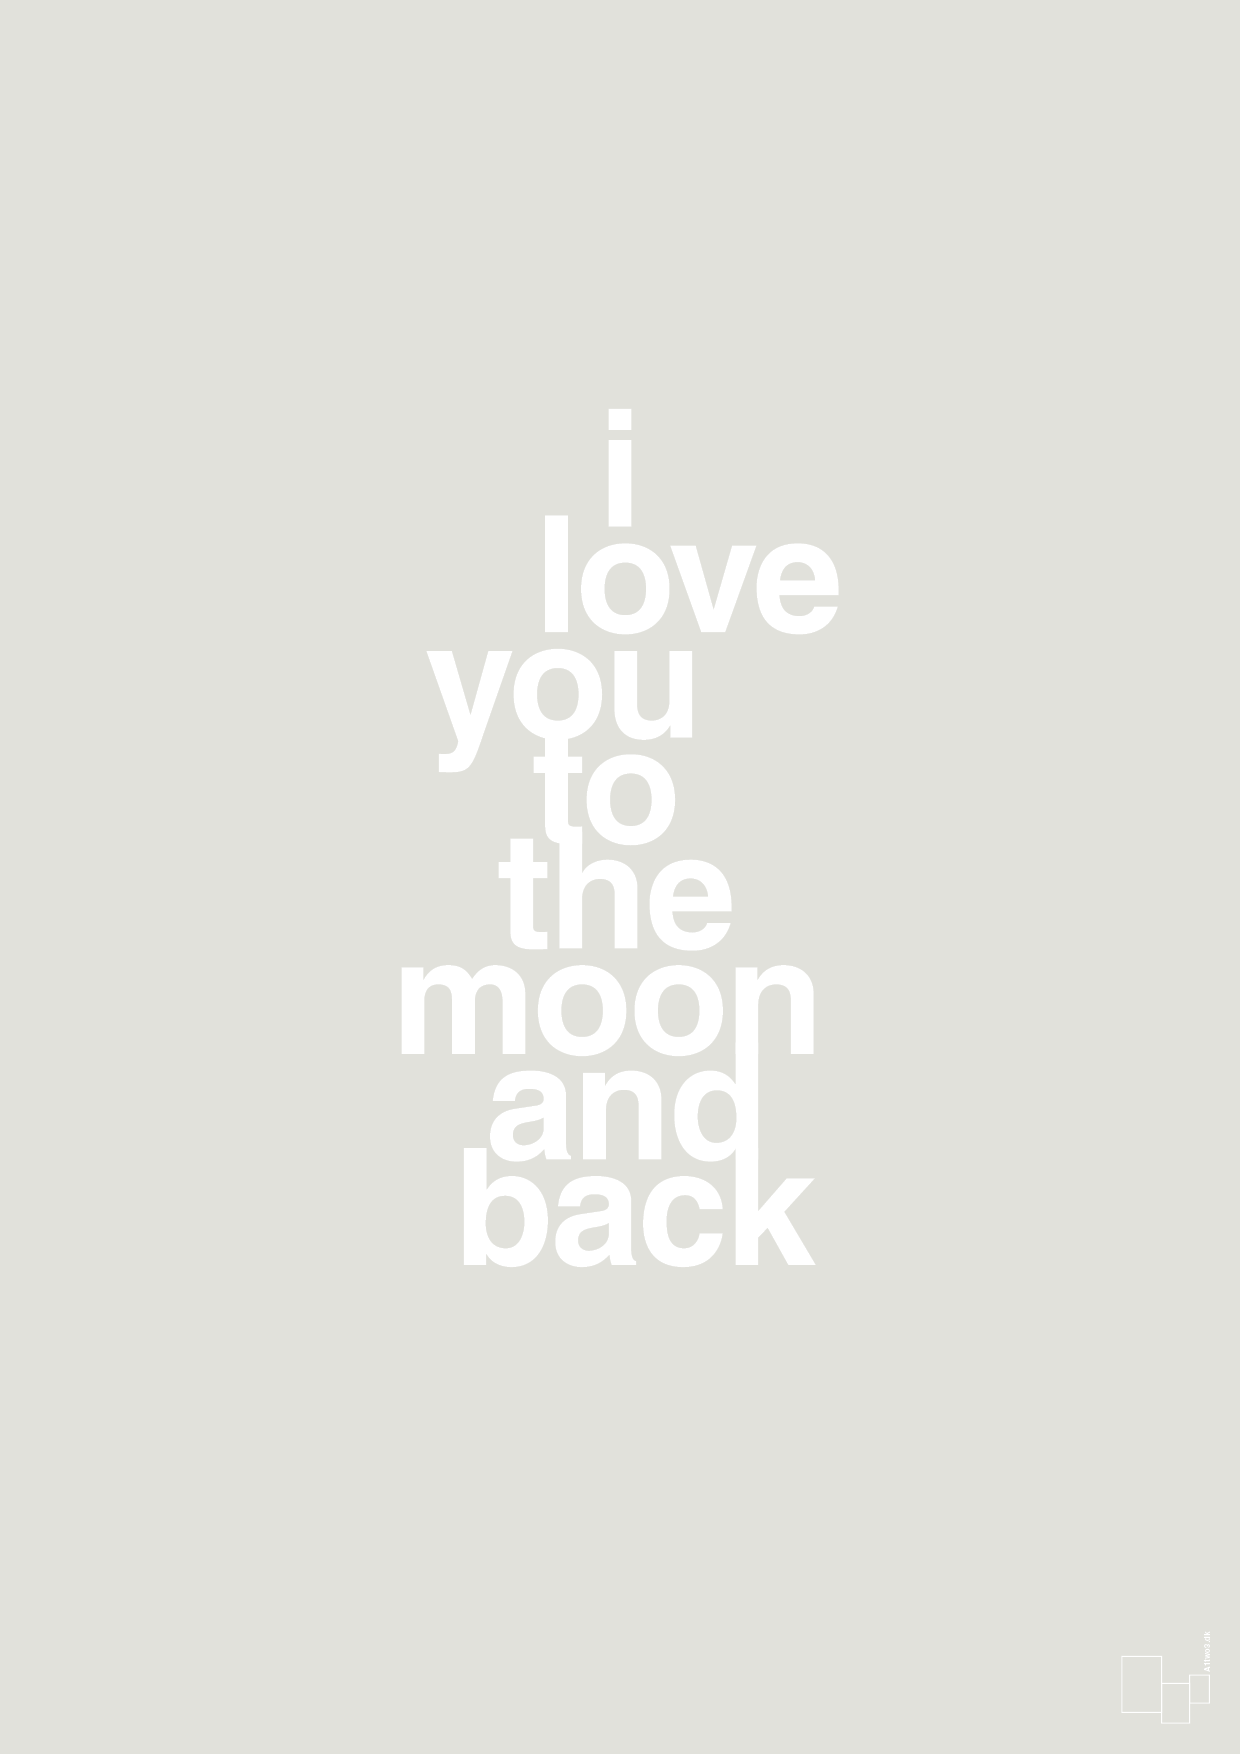 i love you to the moon and back - Plakat med Ordsprog i Painters White